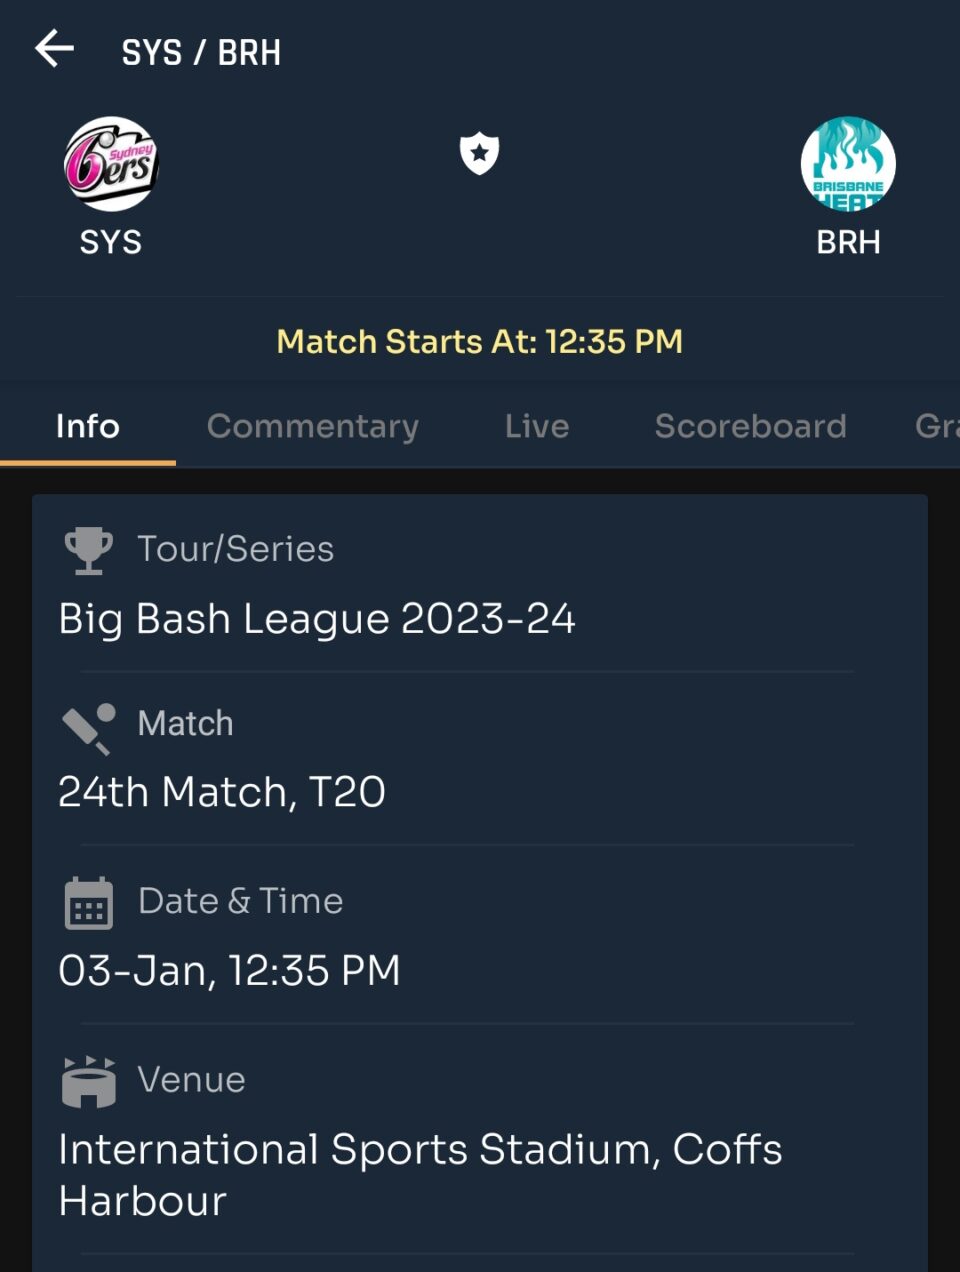 Today BBL Match Number 24 Prediction | SYS vs BRH | Toss and Match Analysis | Pitch & Weather Reports | Probable 11